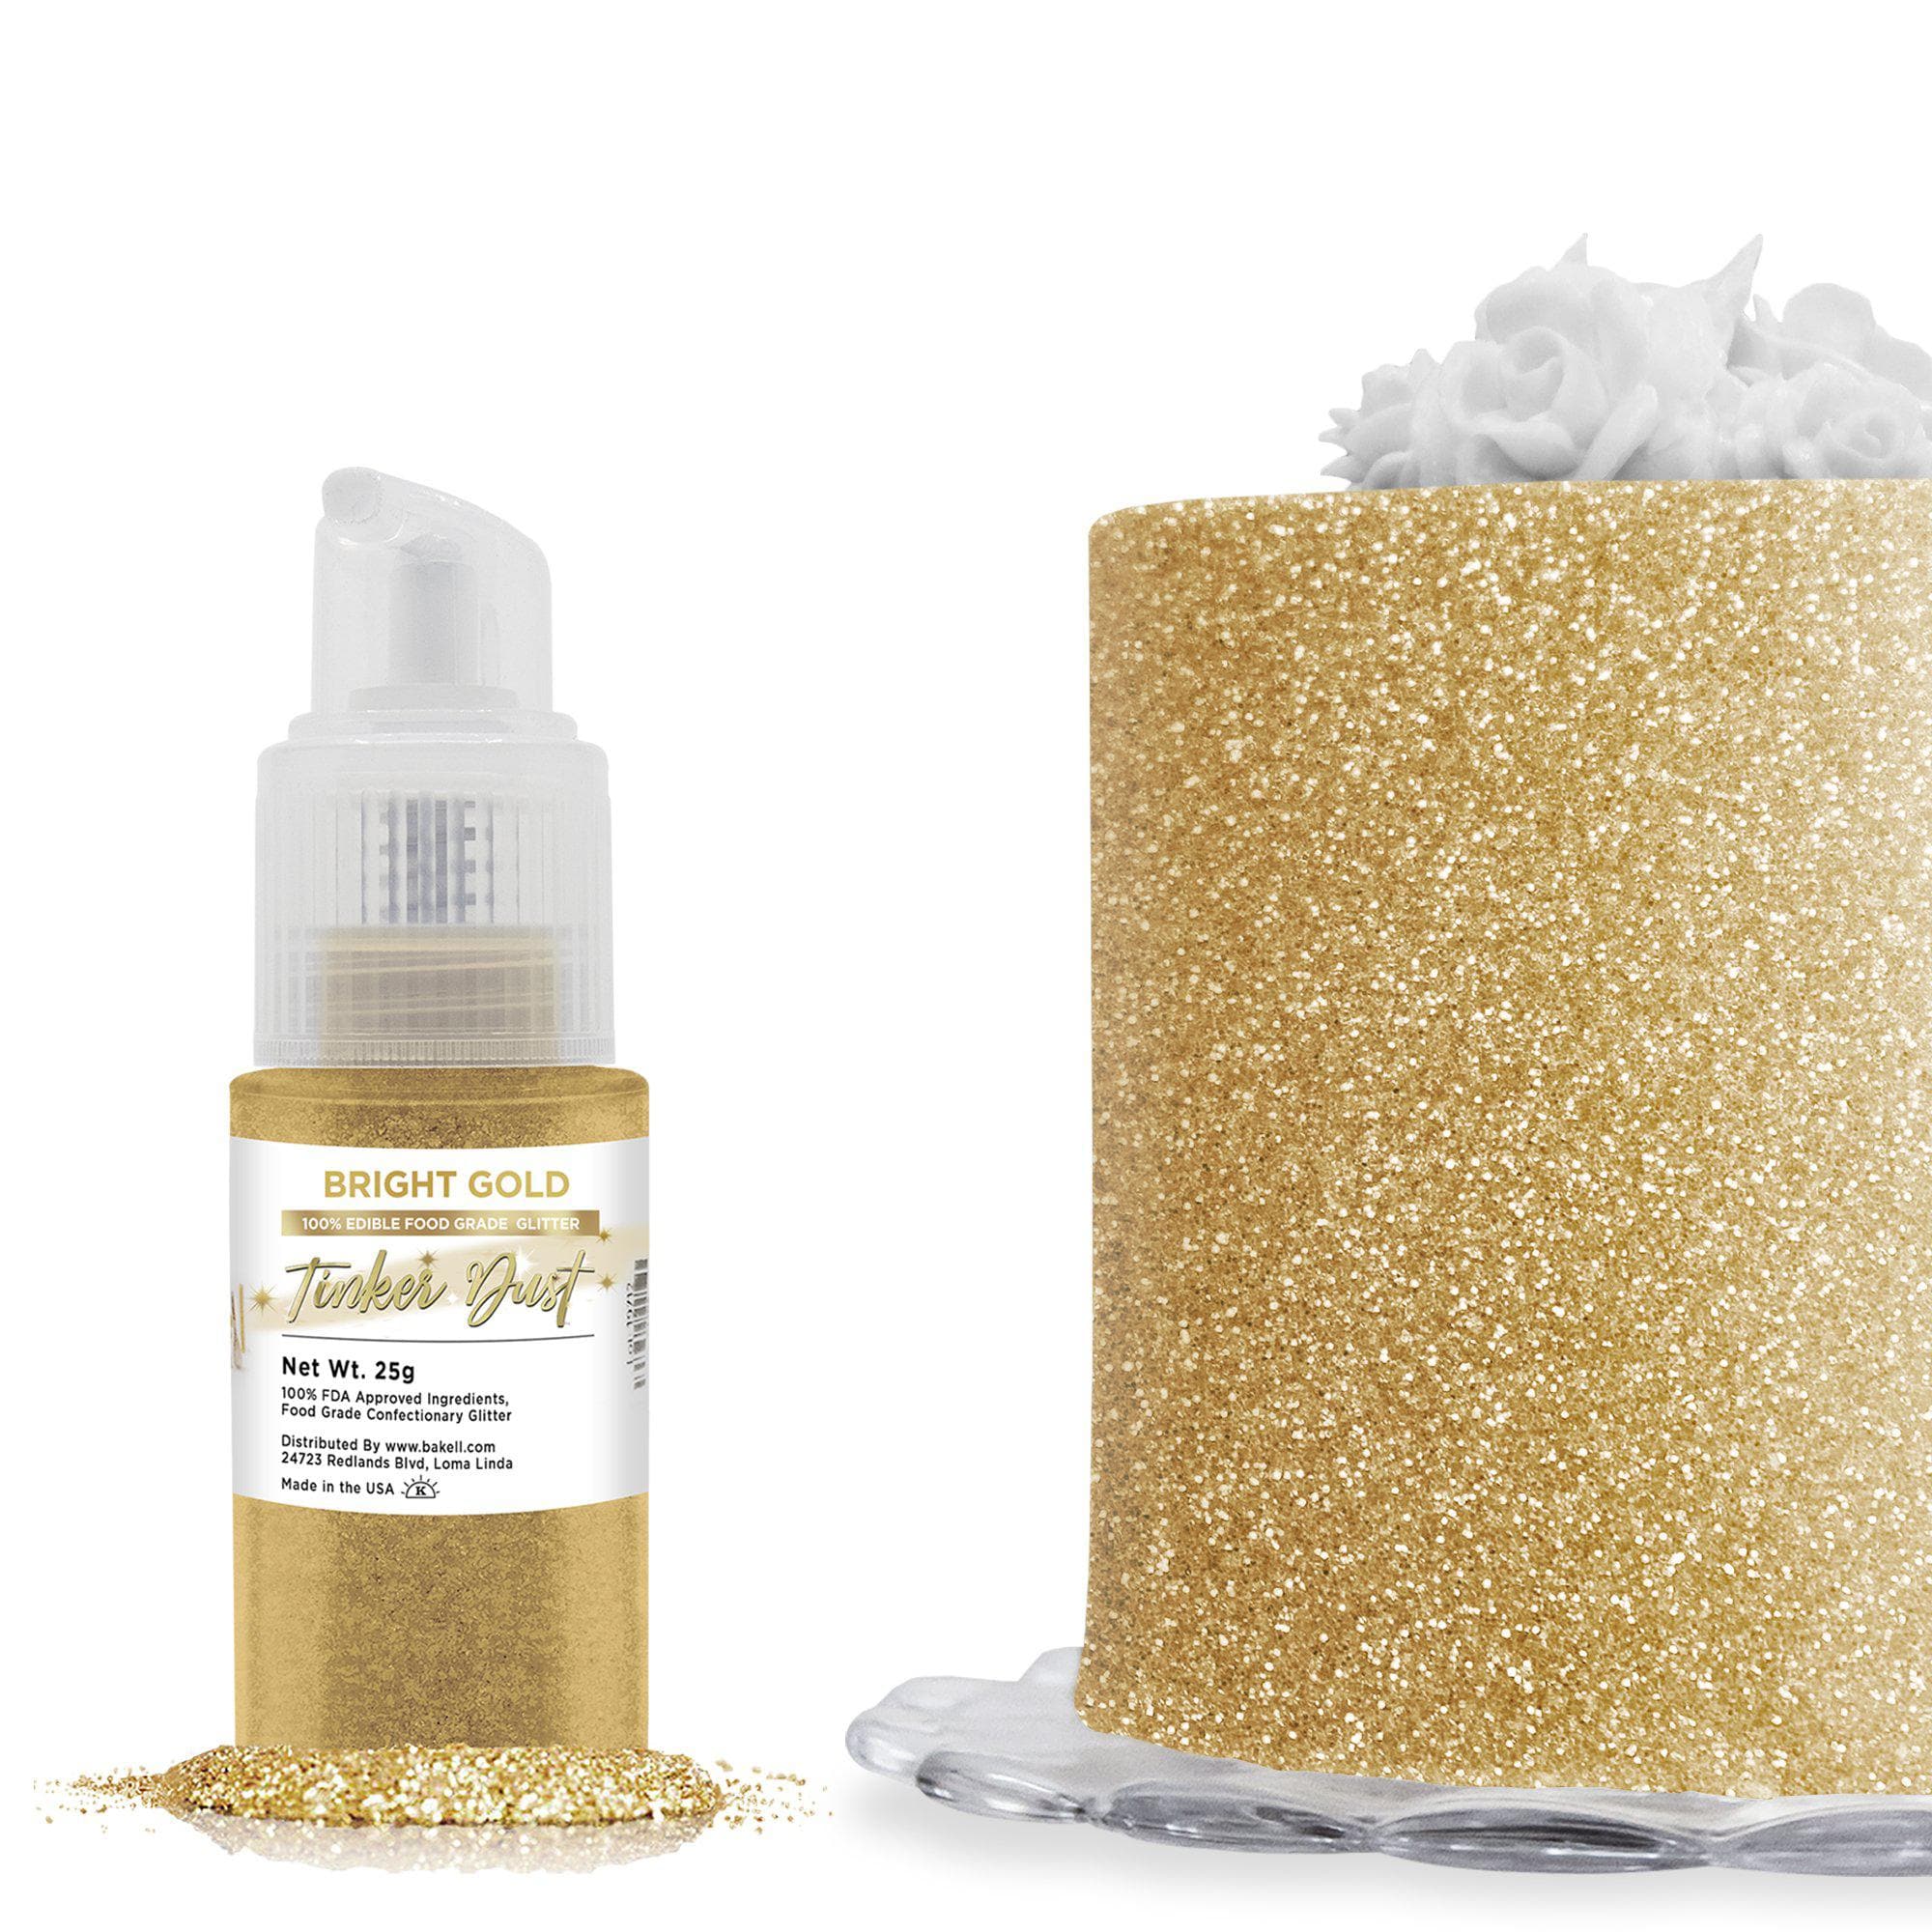 Gold Edible Glitter - 1/4 oz - Food Product - FDA approved